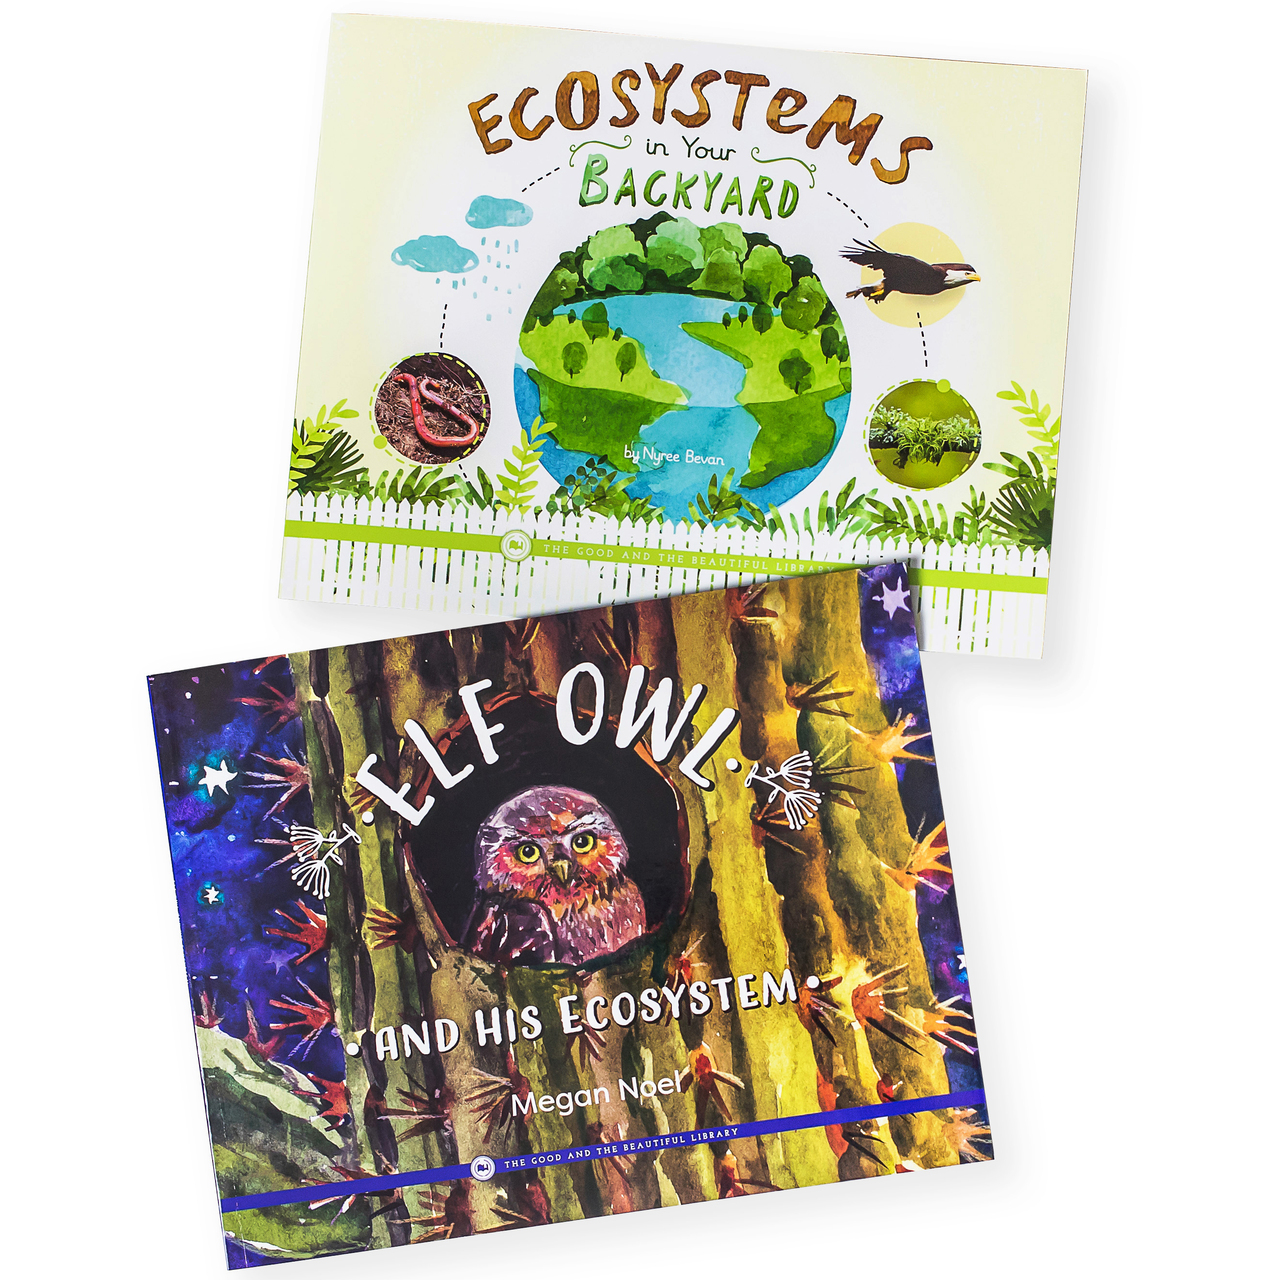 Front Cover Ecosystems in Your Backyard By Nyree Bevan and Elf Owl and His Ecosystem by Megan Noel